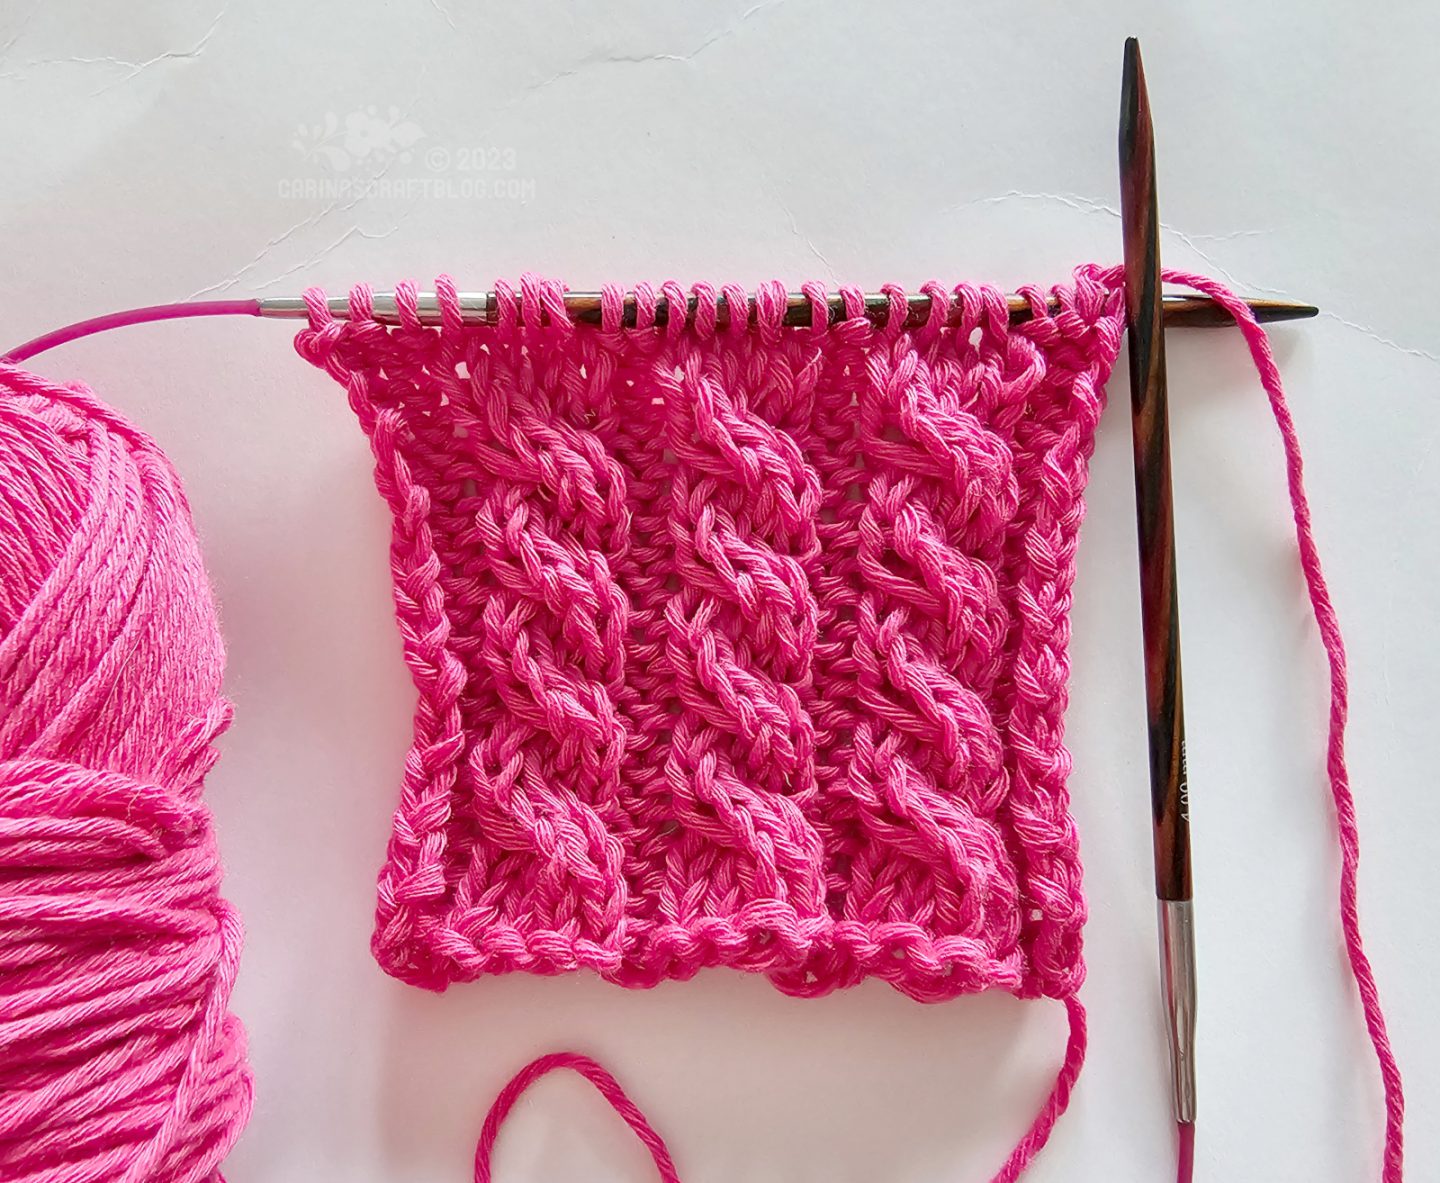 Overhead view of a short piece of knitting with a cabled pattern using hot pink year.